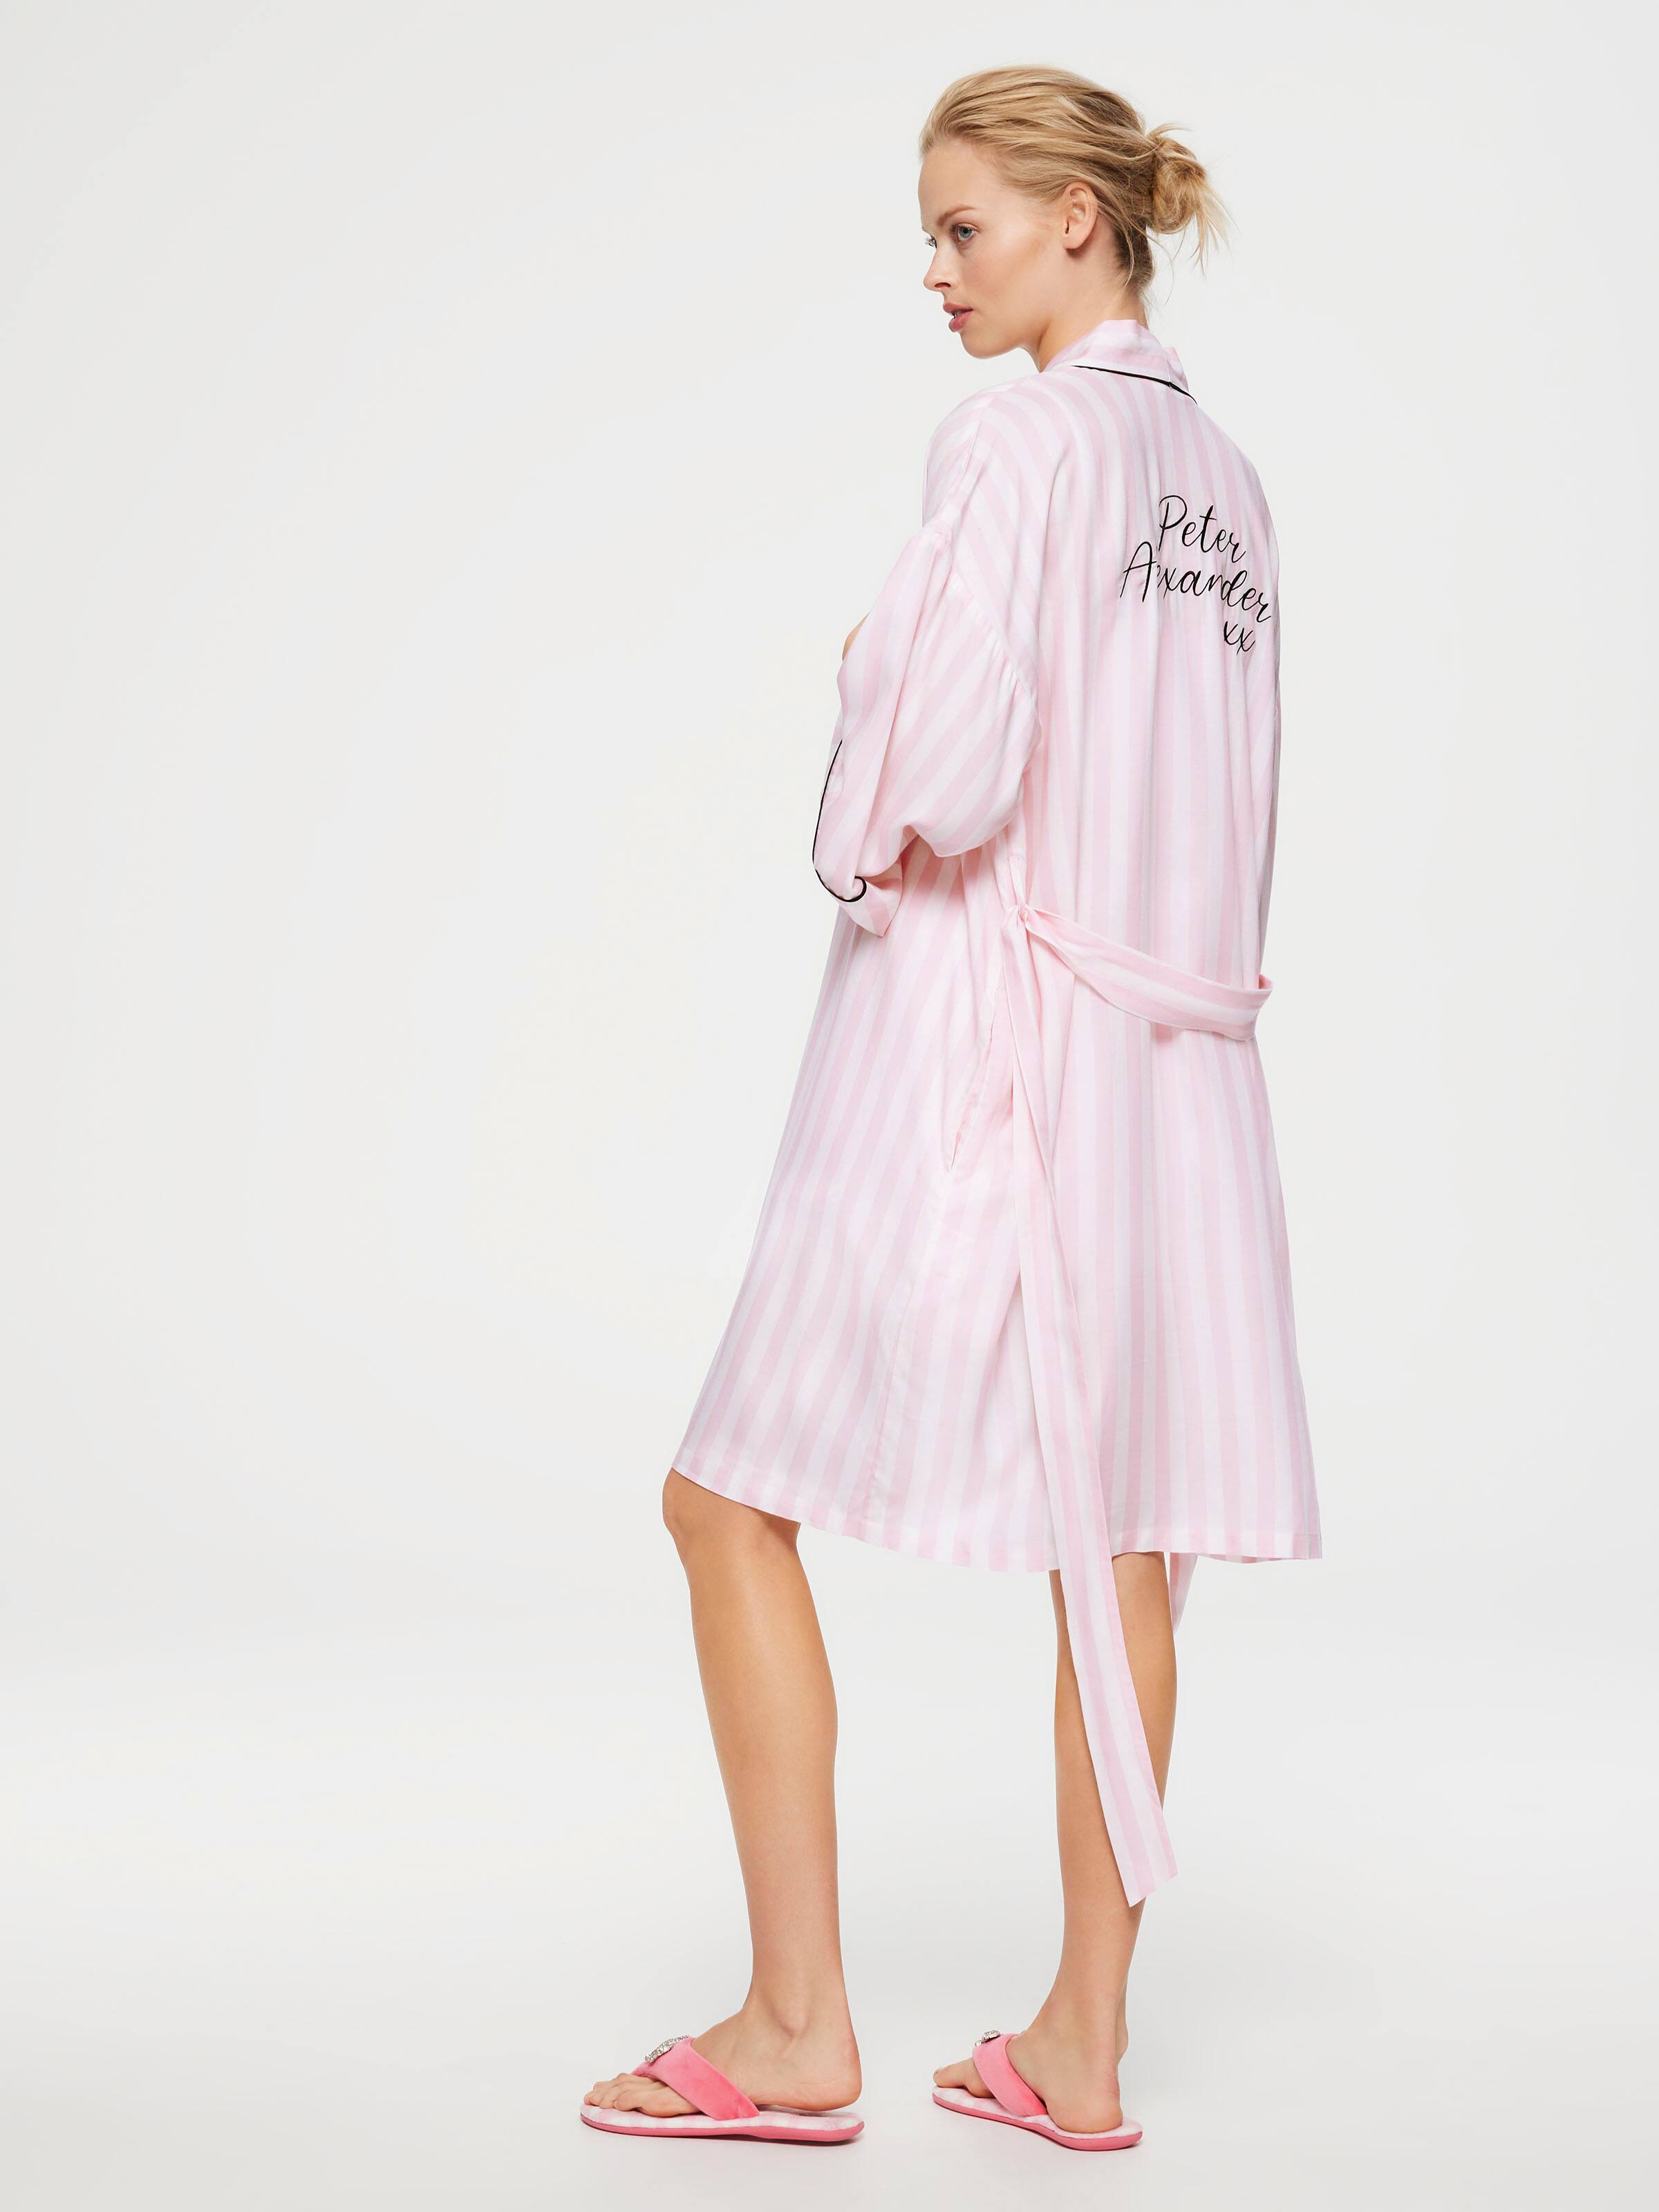 Women's Robes | Dressing Gowns | Next Official Site